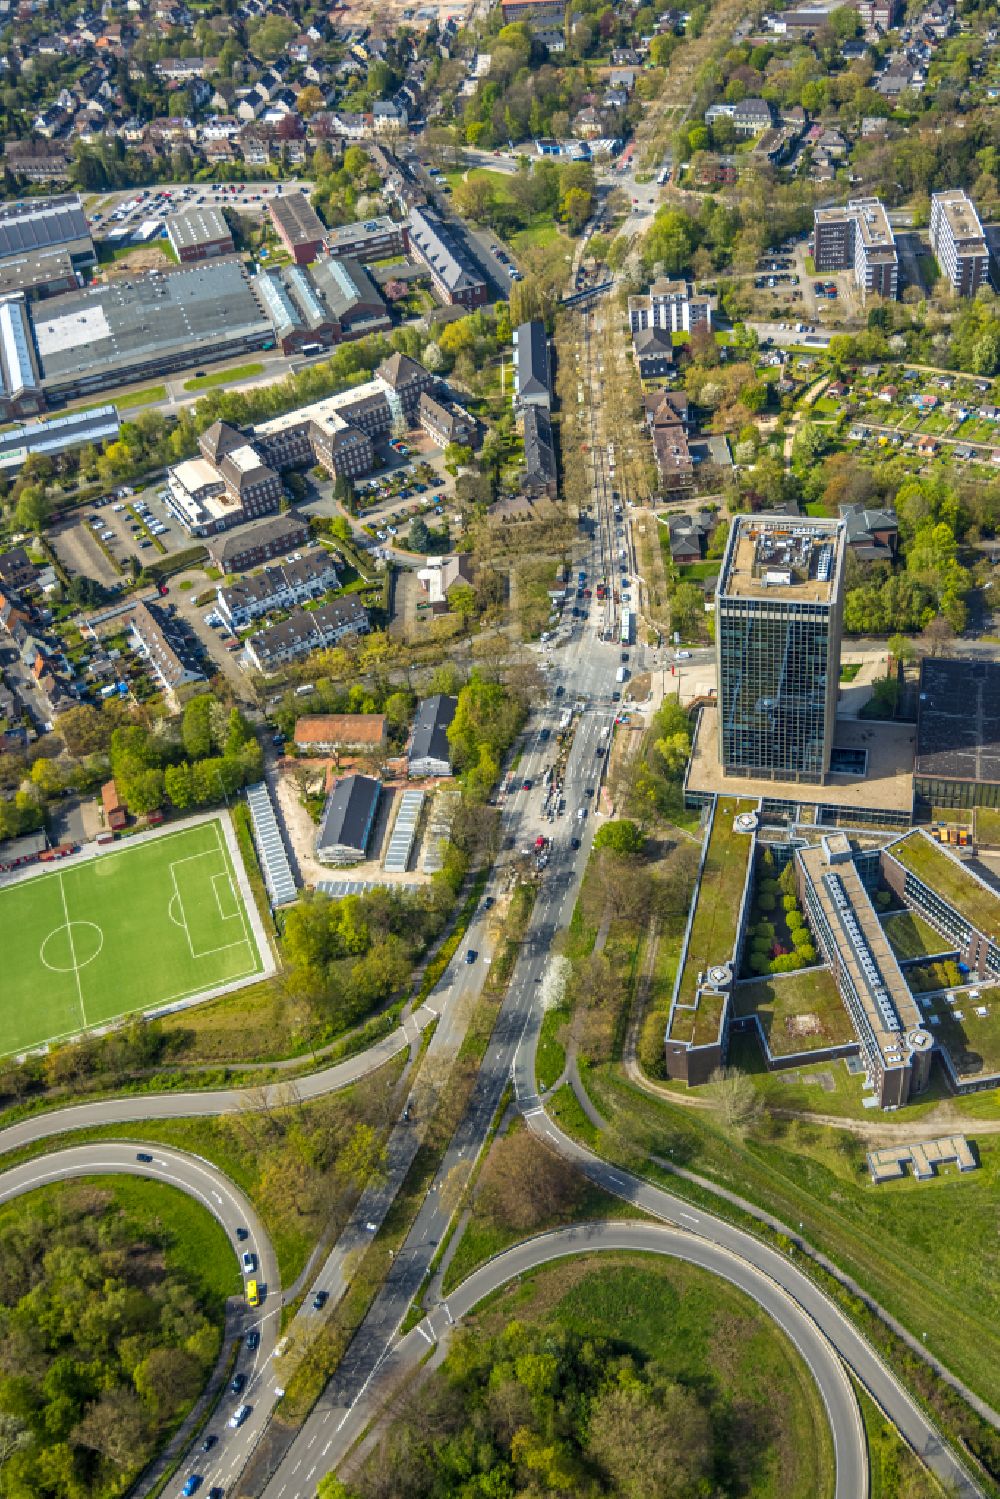 Aerial photograph Wiemelhausen - Office and administration buildings of the insurance company of Knappschaft on Knappschaftstrasse in Wiemelhausen in the state North Rhine-Westphalia, Germany